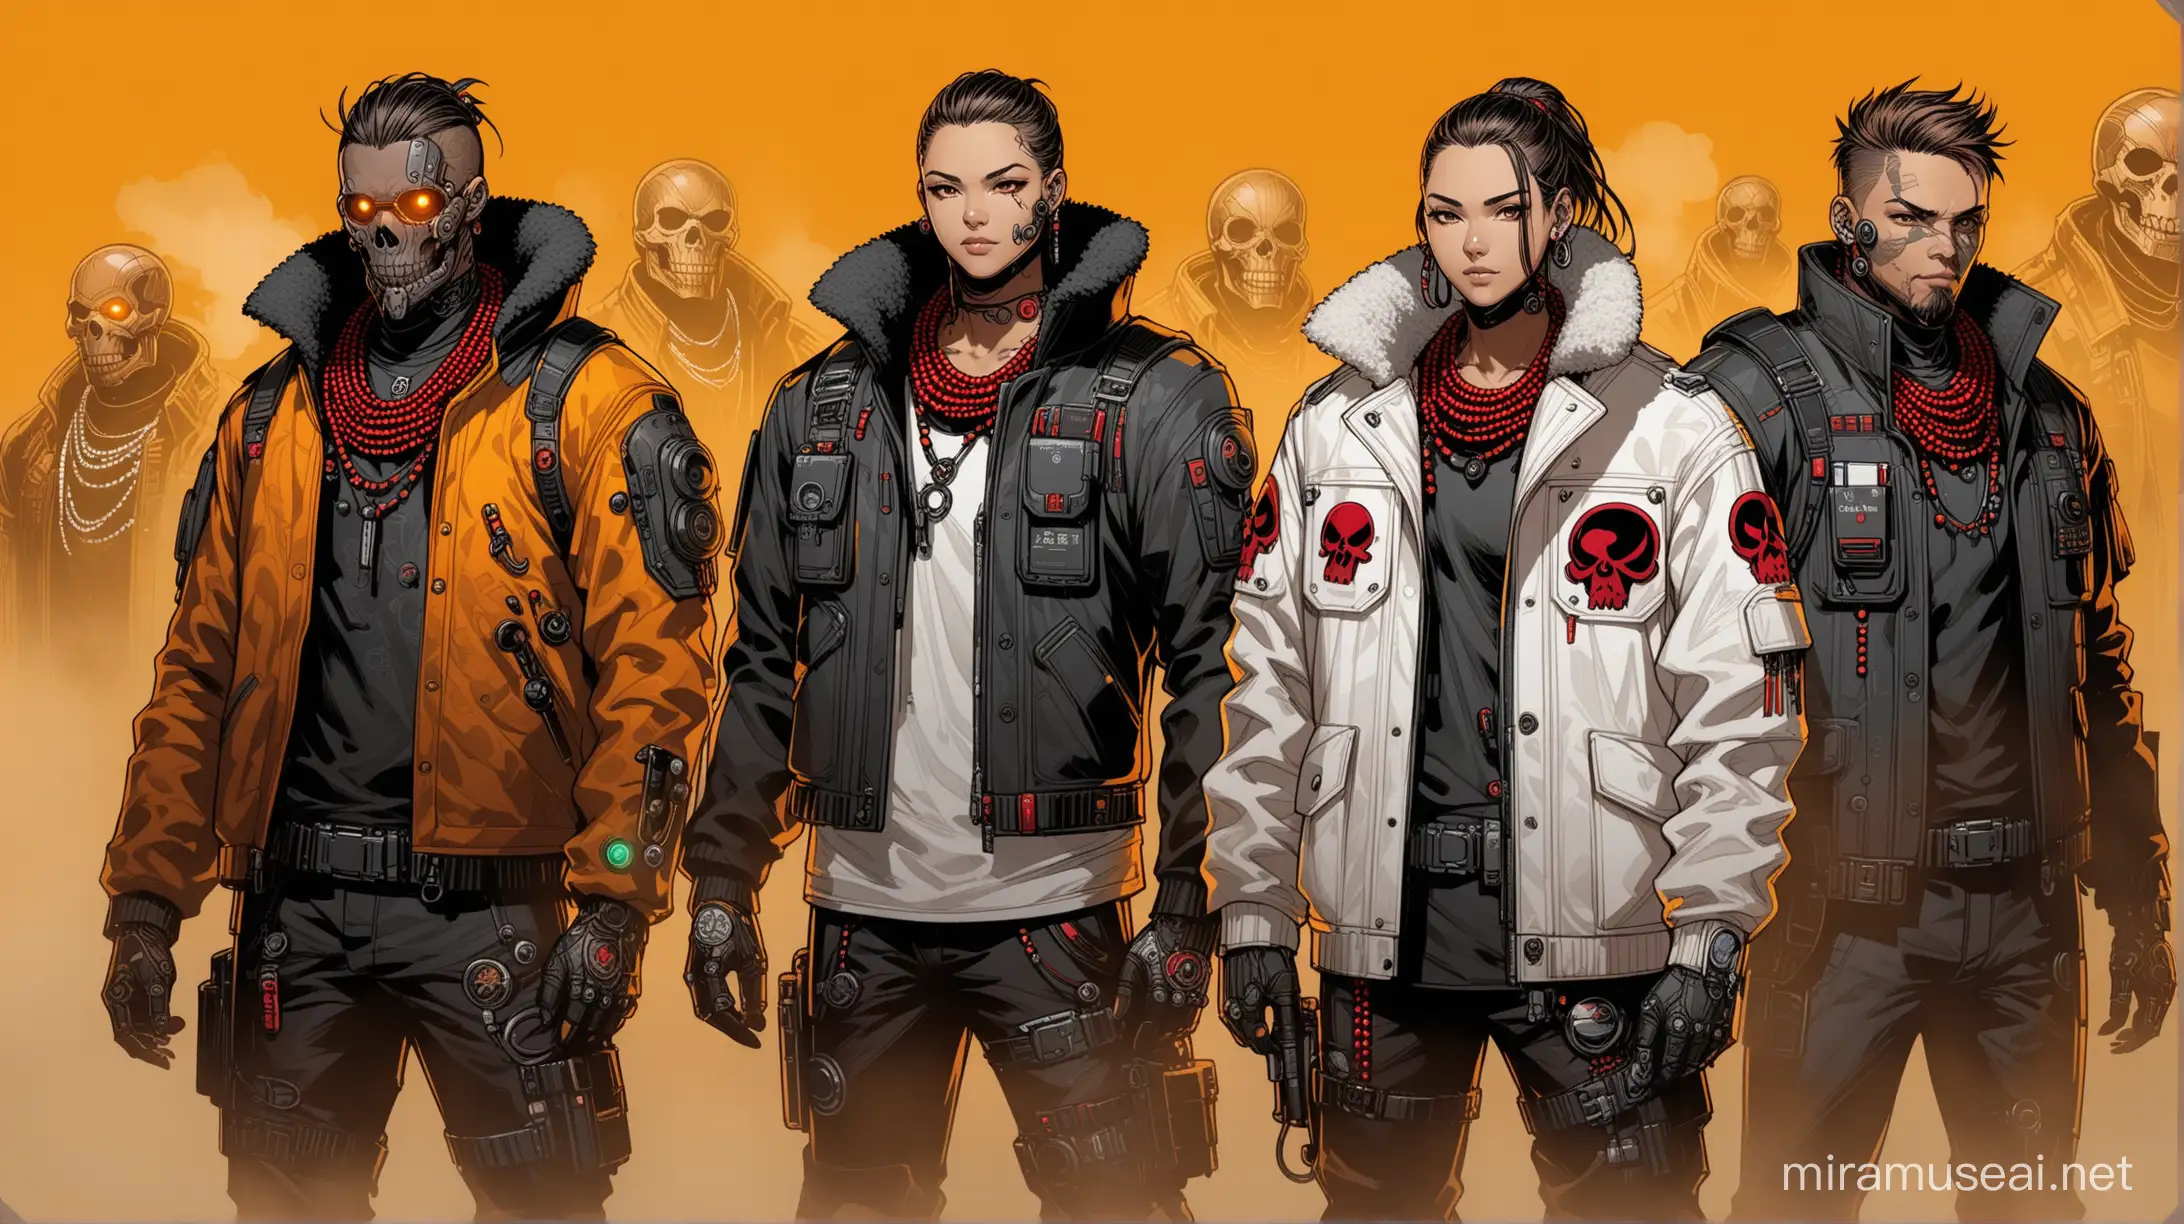 jacket with wool collar, steam, beads, group of different characters, character concept art, intricate details, cyberpunk, amber background with gray brush strokes, character options, lots of detail, white jacket with studs, red skull on the back of the jacket, round wooden beads beads on the neck,